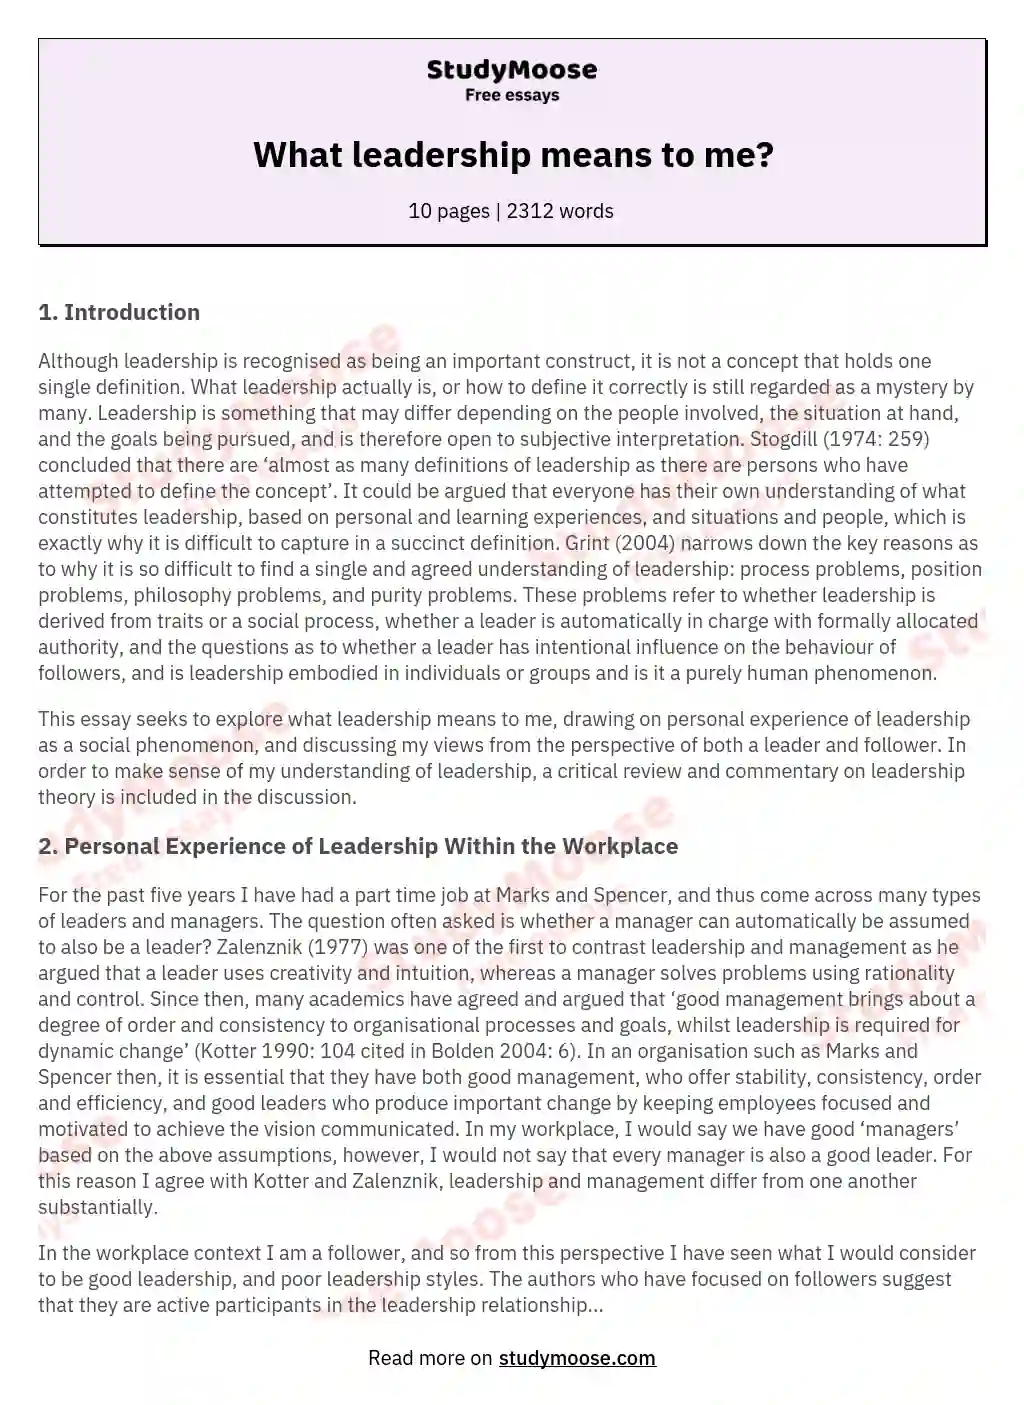 What leadership means to me? essay